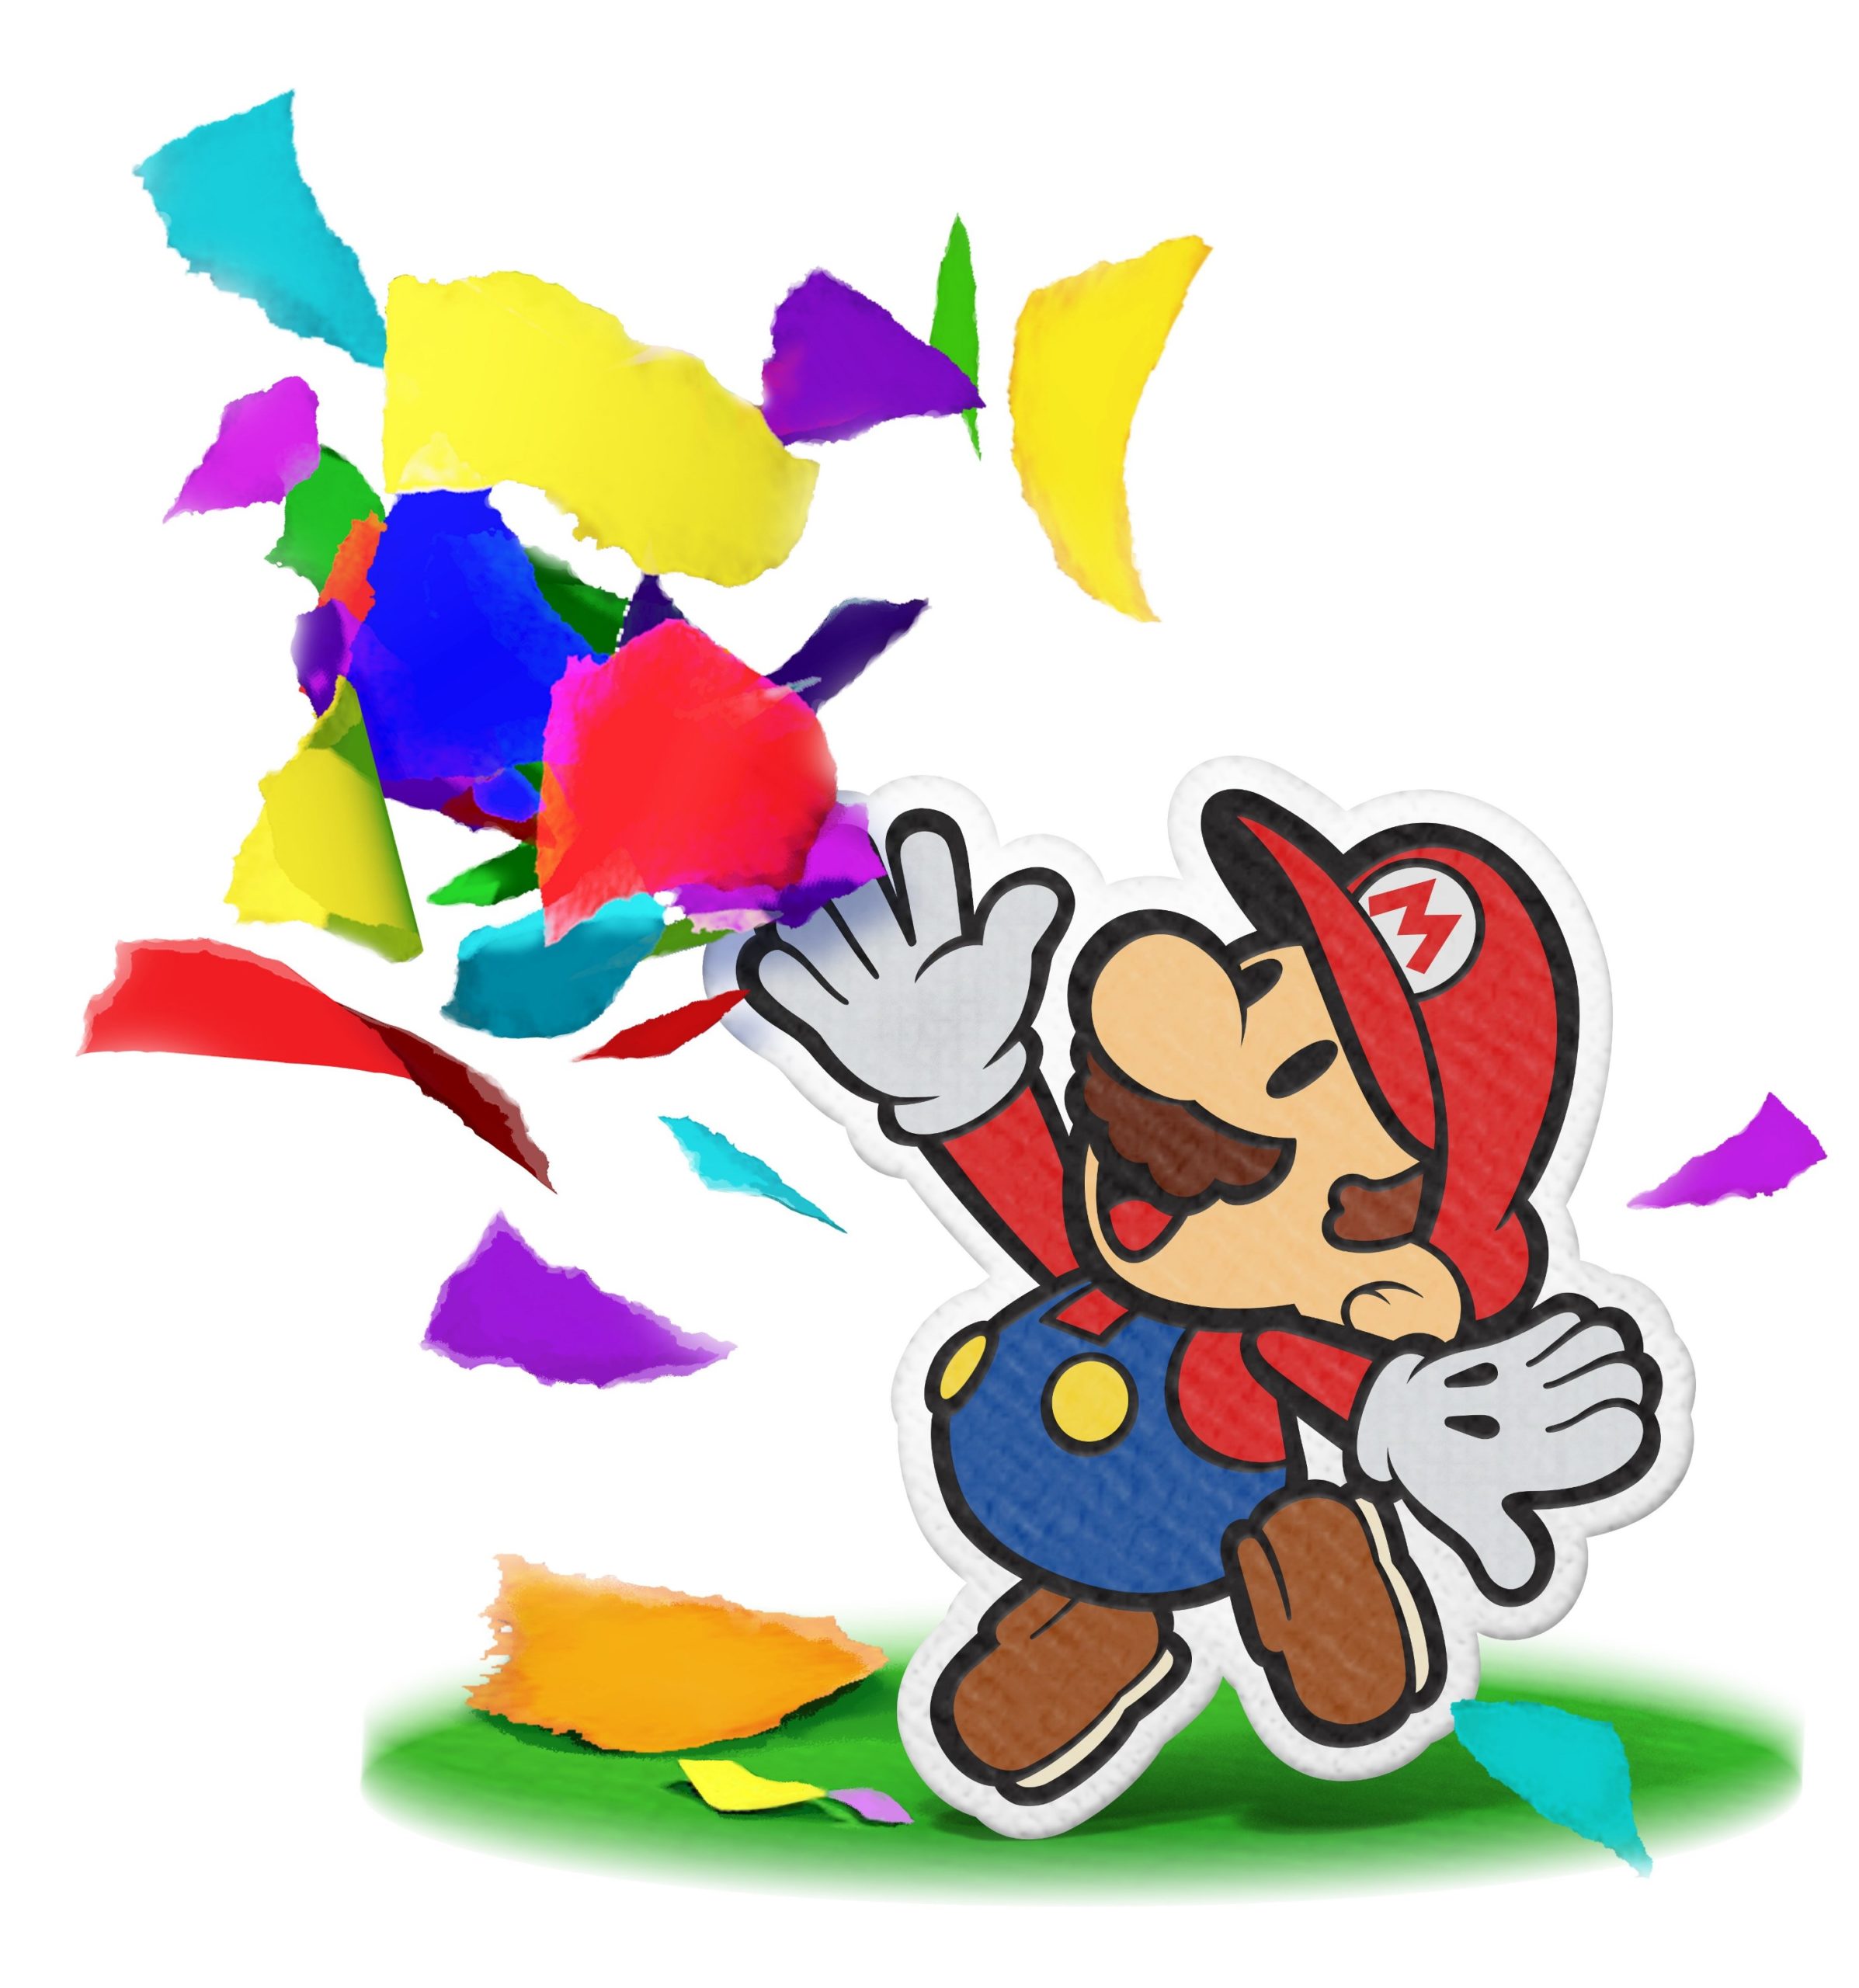 Tons of Paper Mario: The Origami King character art